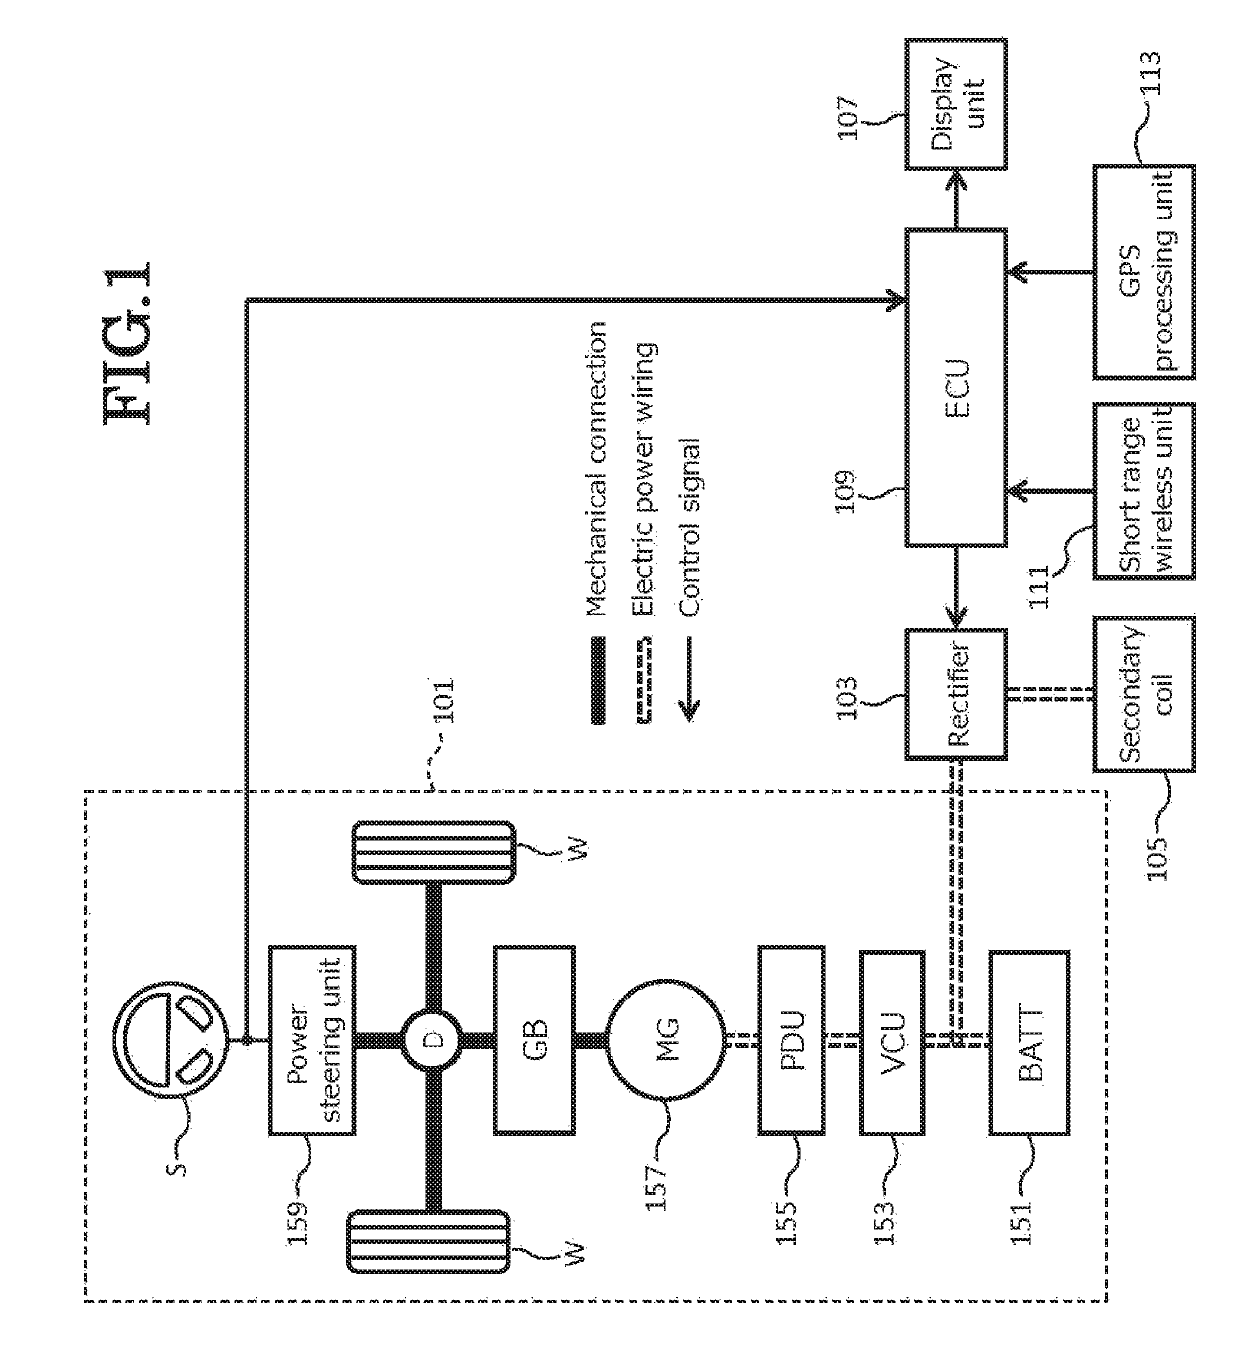 Power transmission and reception system for vehicle with graphical alignment